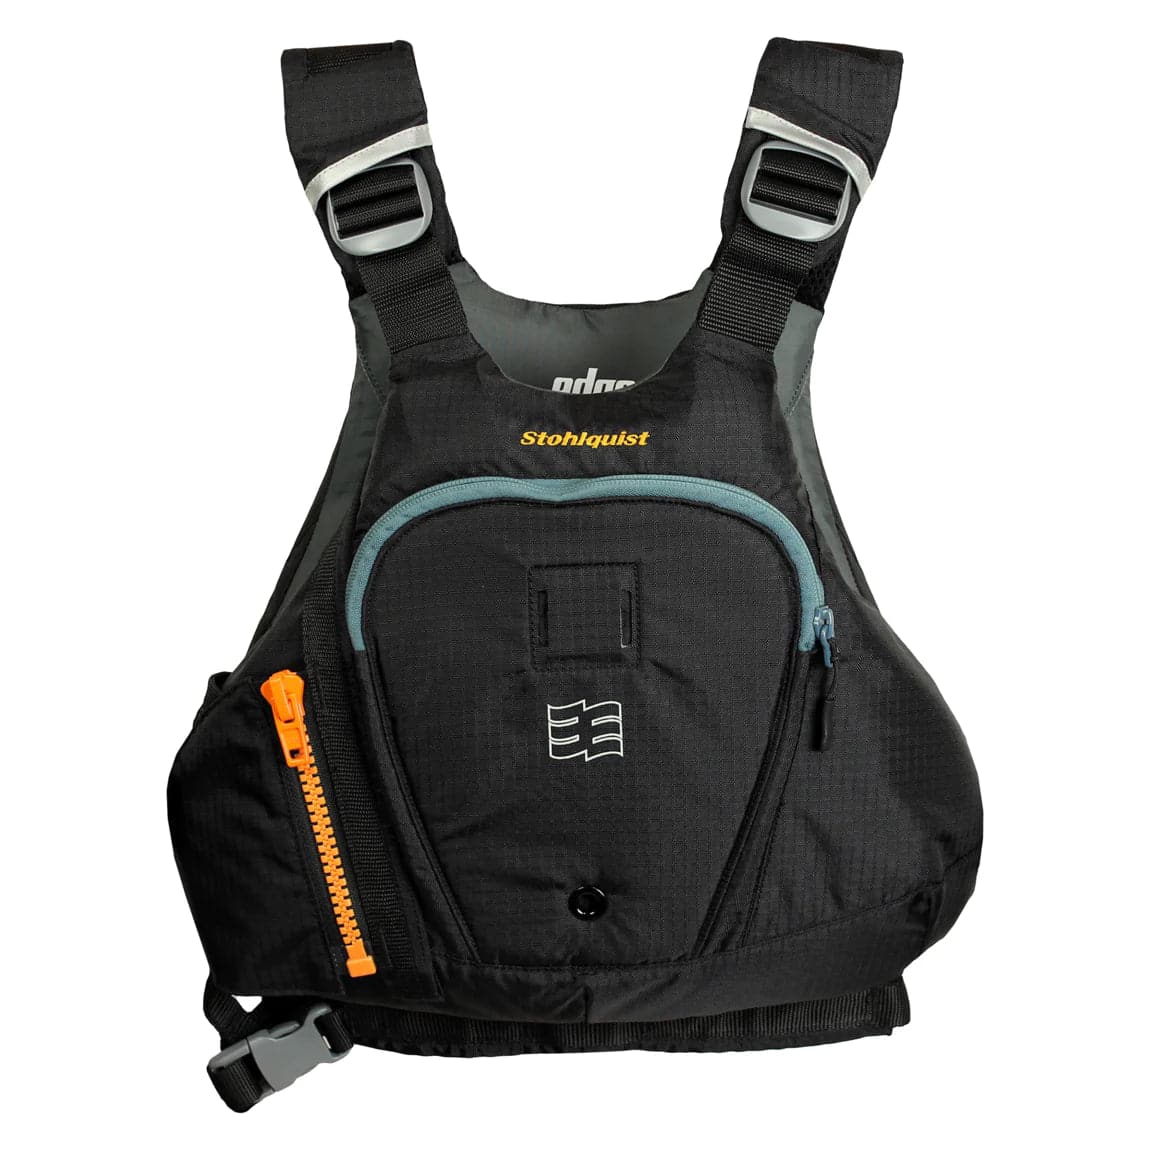 Featuring the Edge PFD men's pfd manufactured by Stohlquist shown here from a second angle.